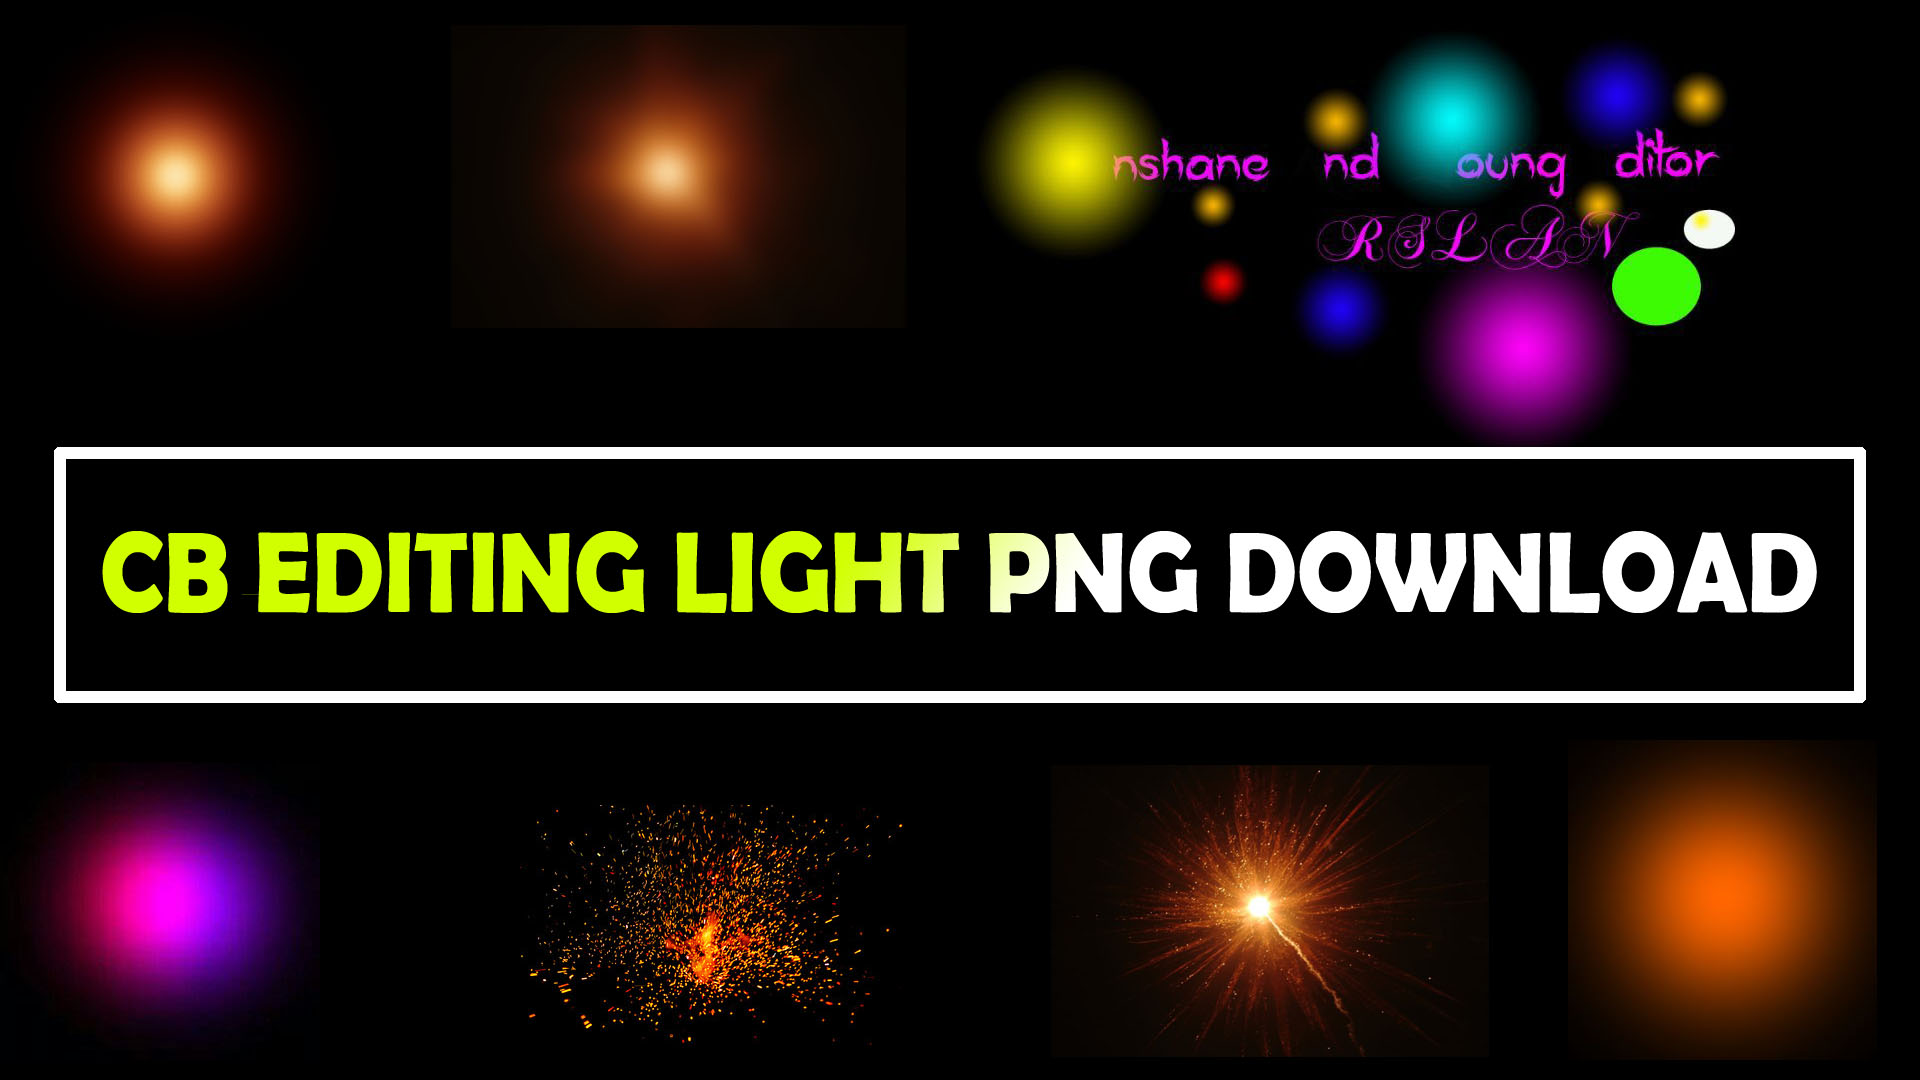 Cb Light Png Download - Graphic Design , HD Wallpaper & Backgrounds